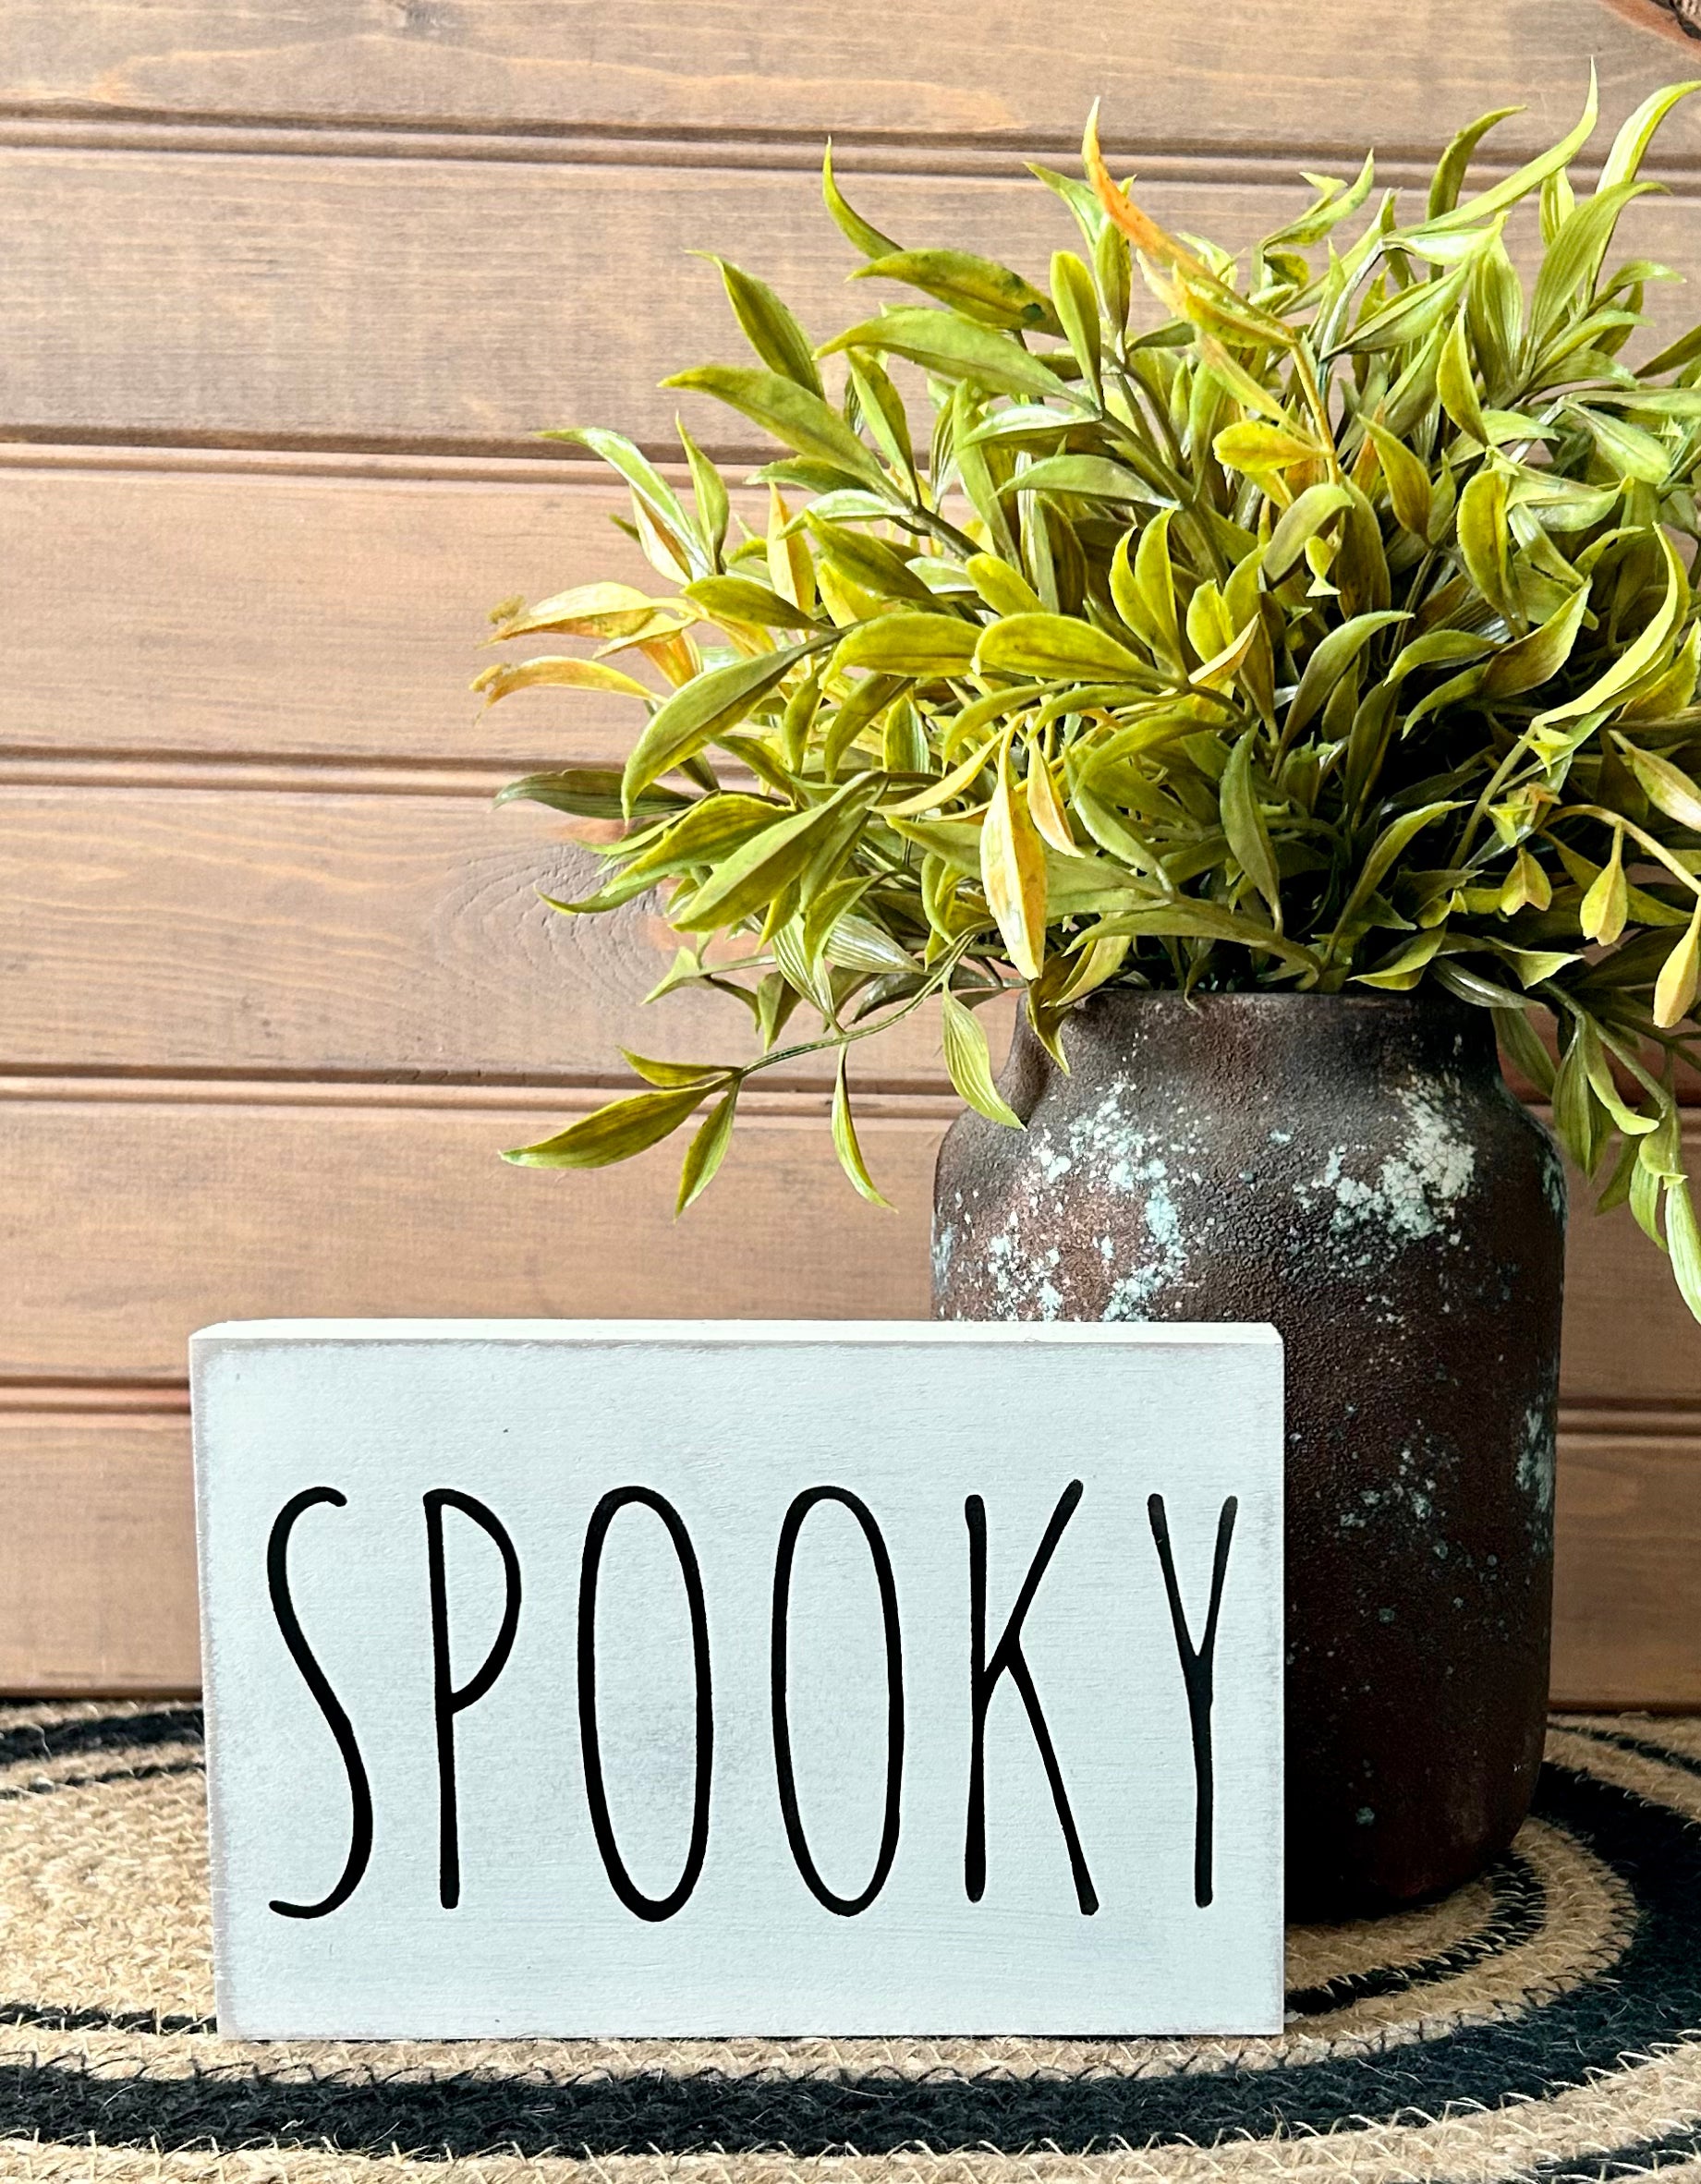 "Spooky" wood sign